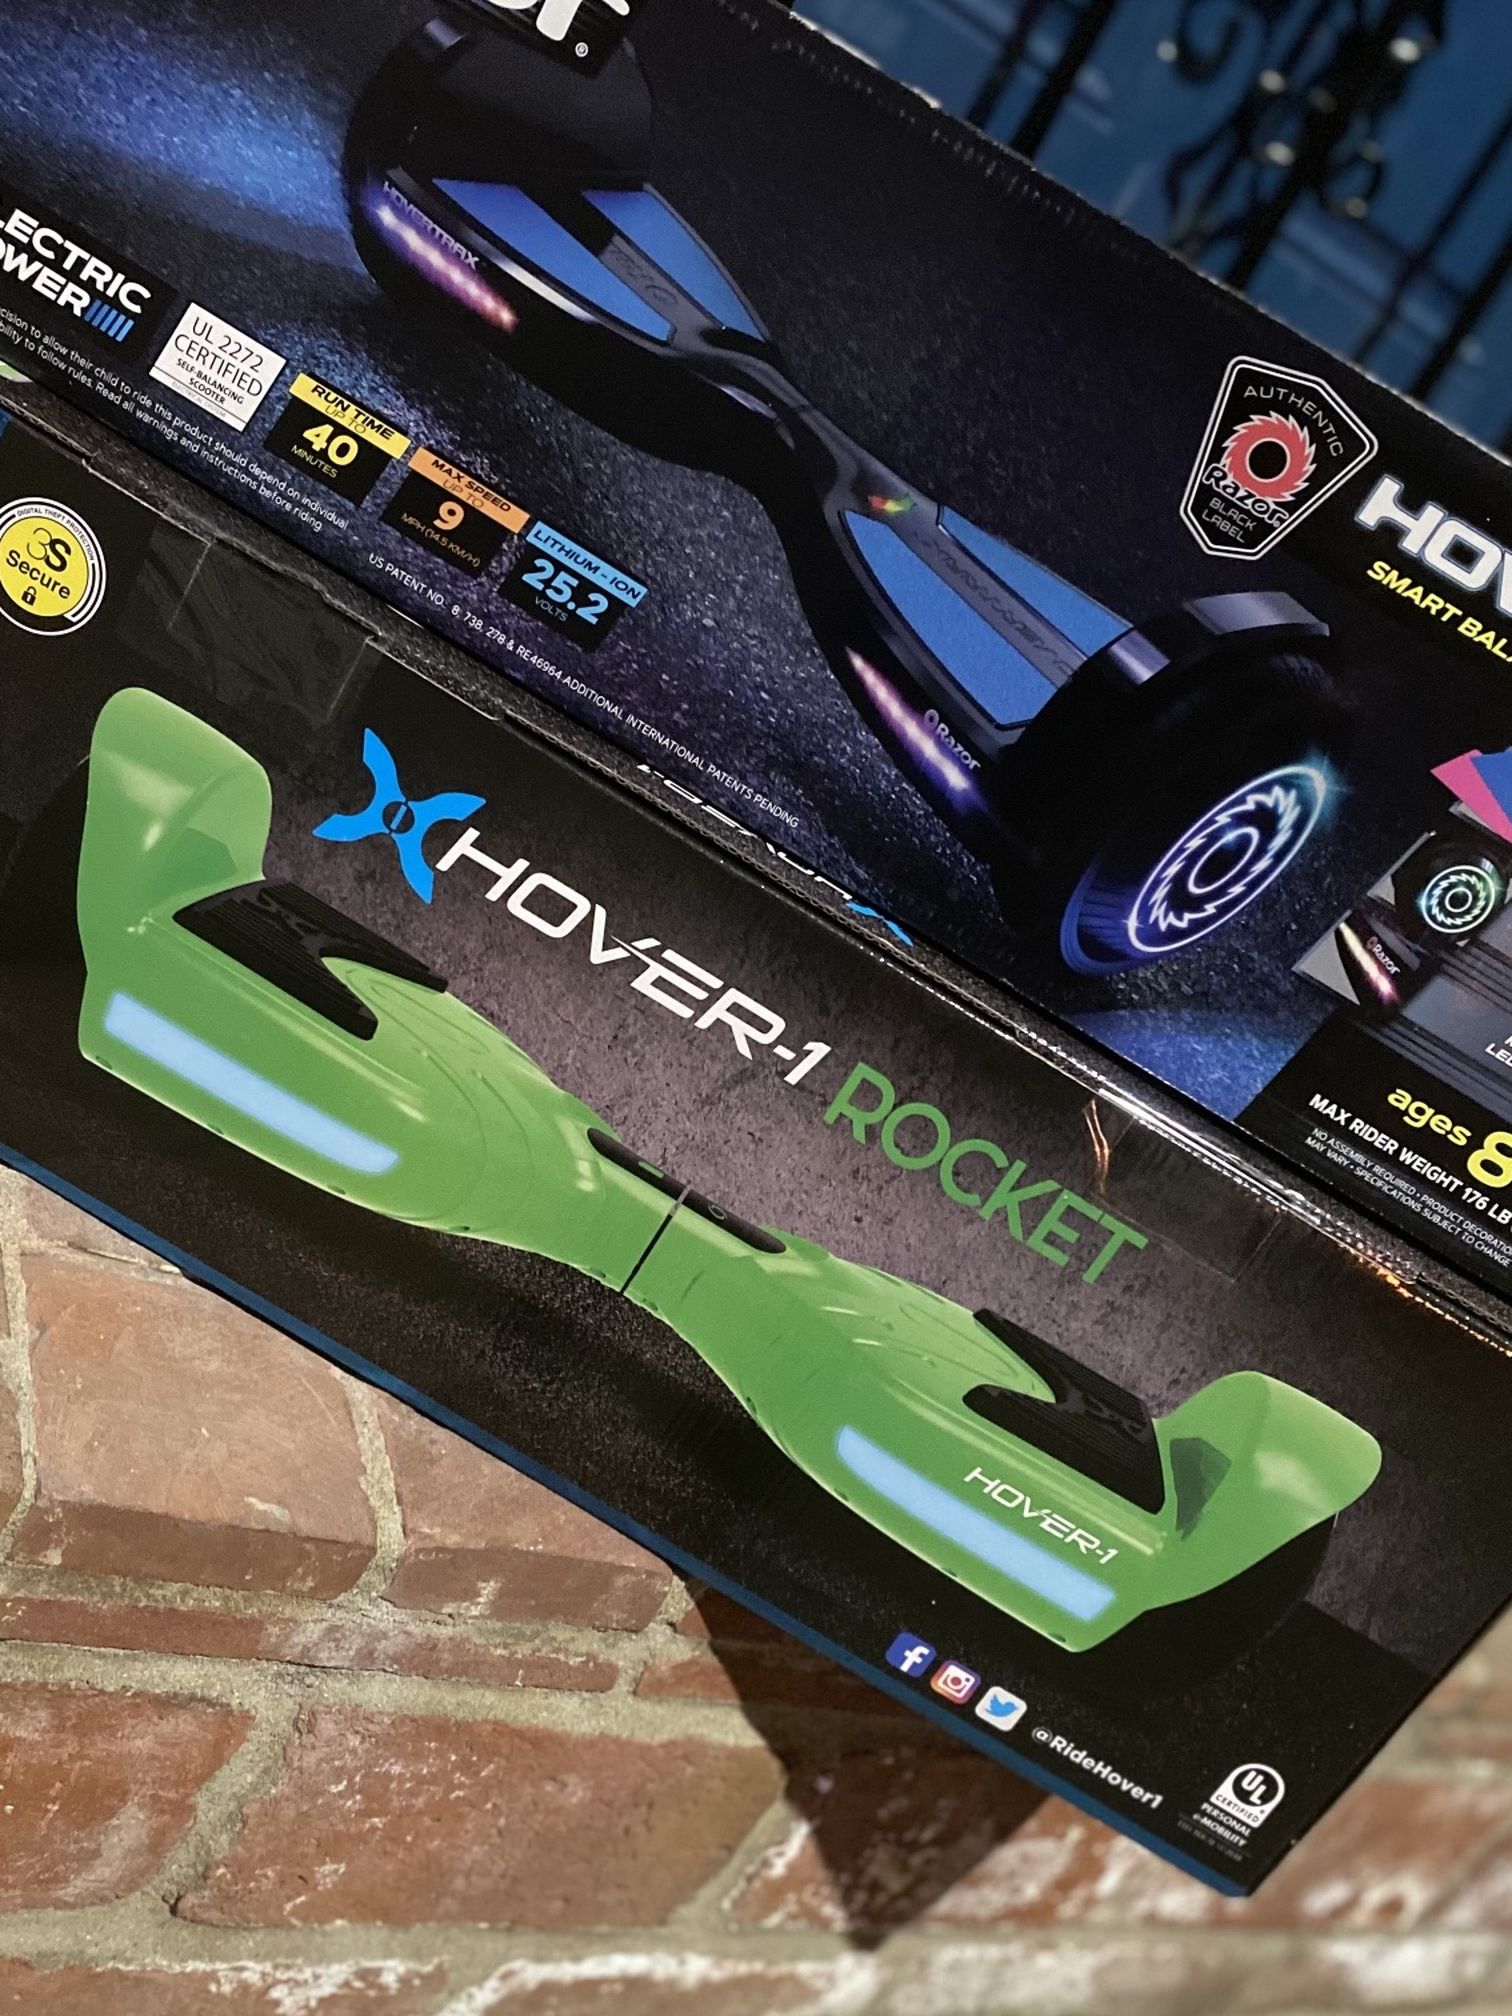 Hover Boards